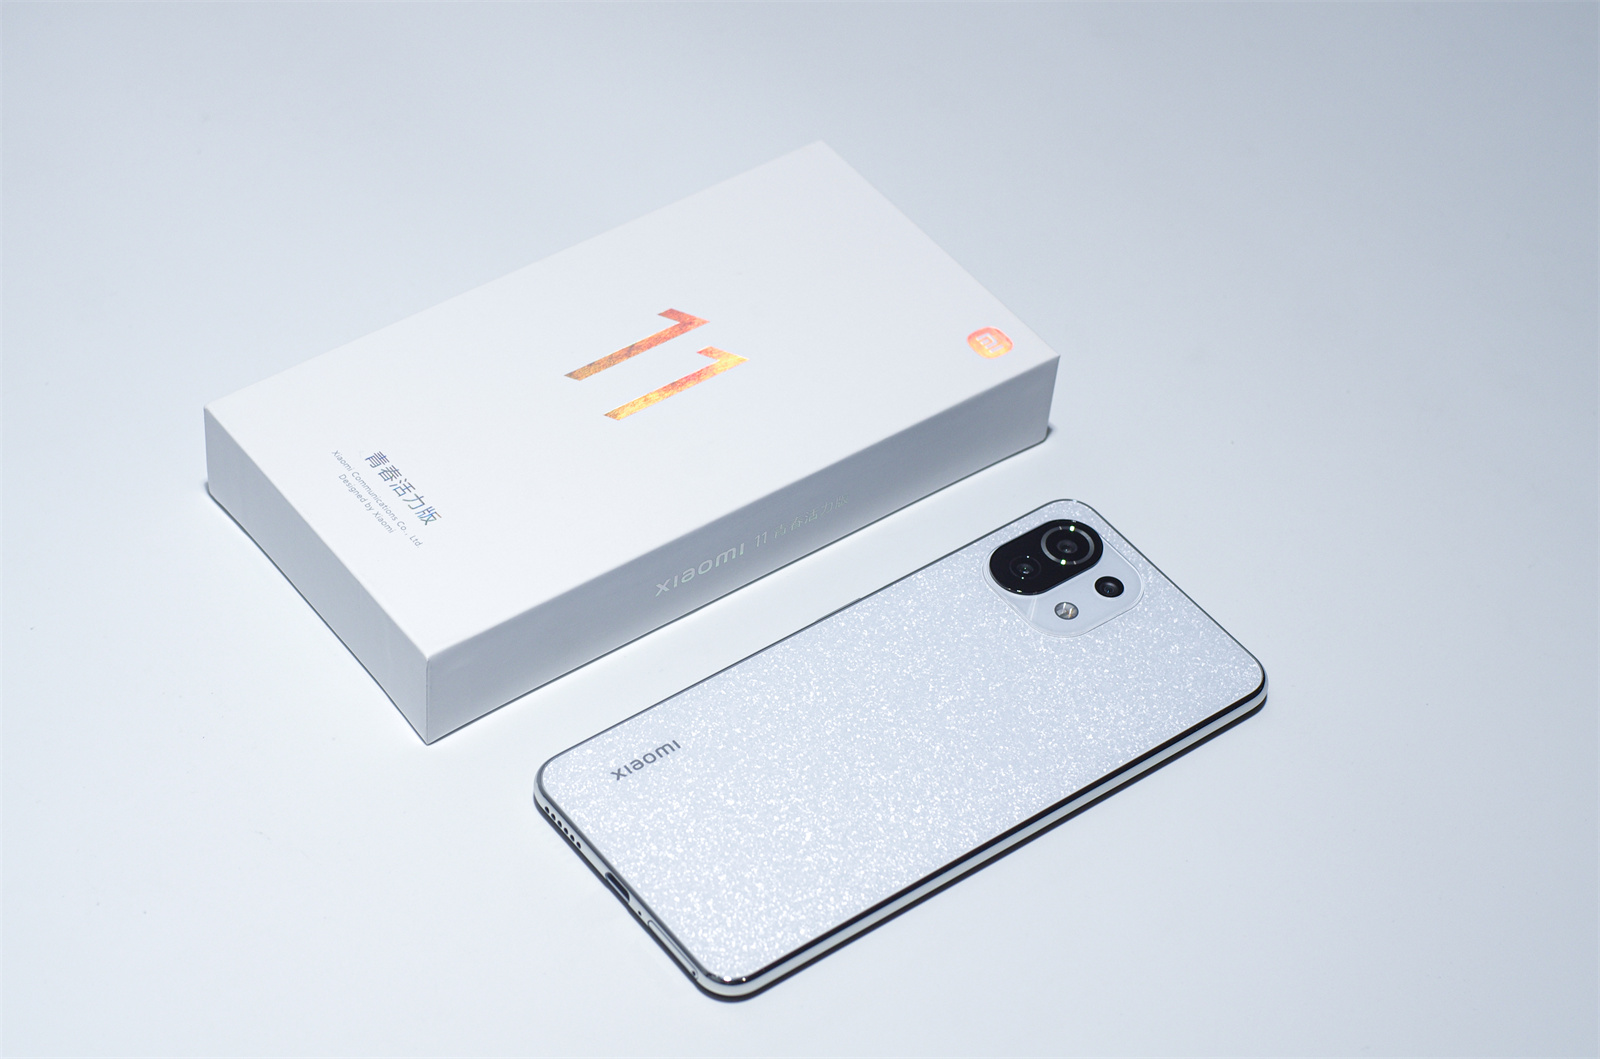 From 1999 yuan, the thinnest 5G mobile phone in Xiaomi's history: the new color scheme is eye-catching